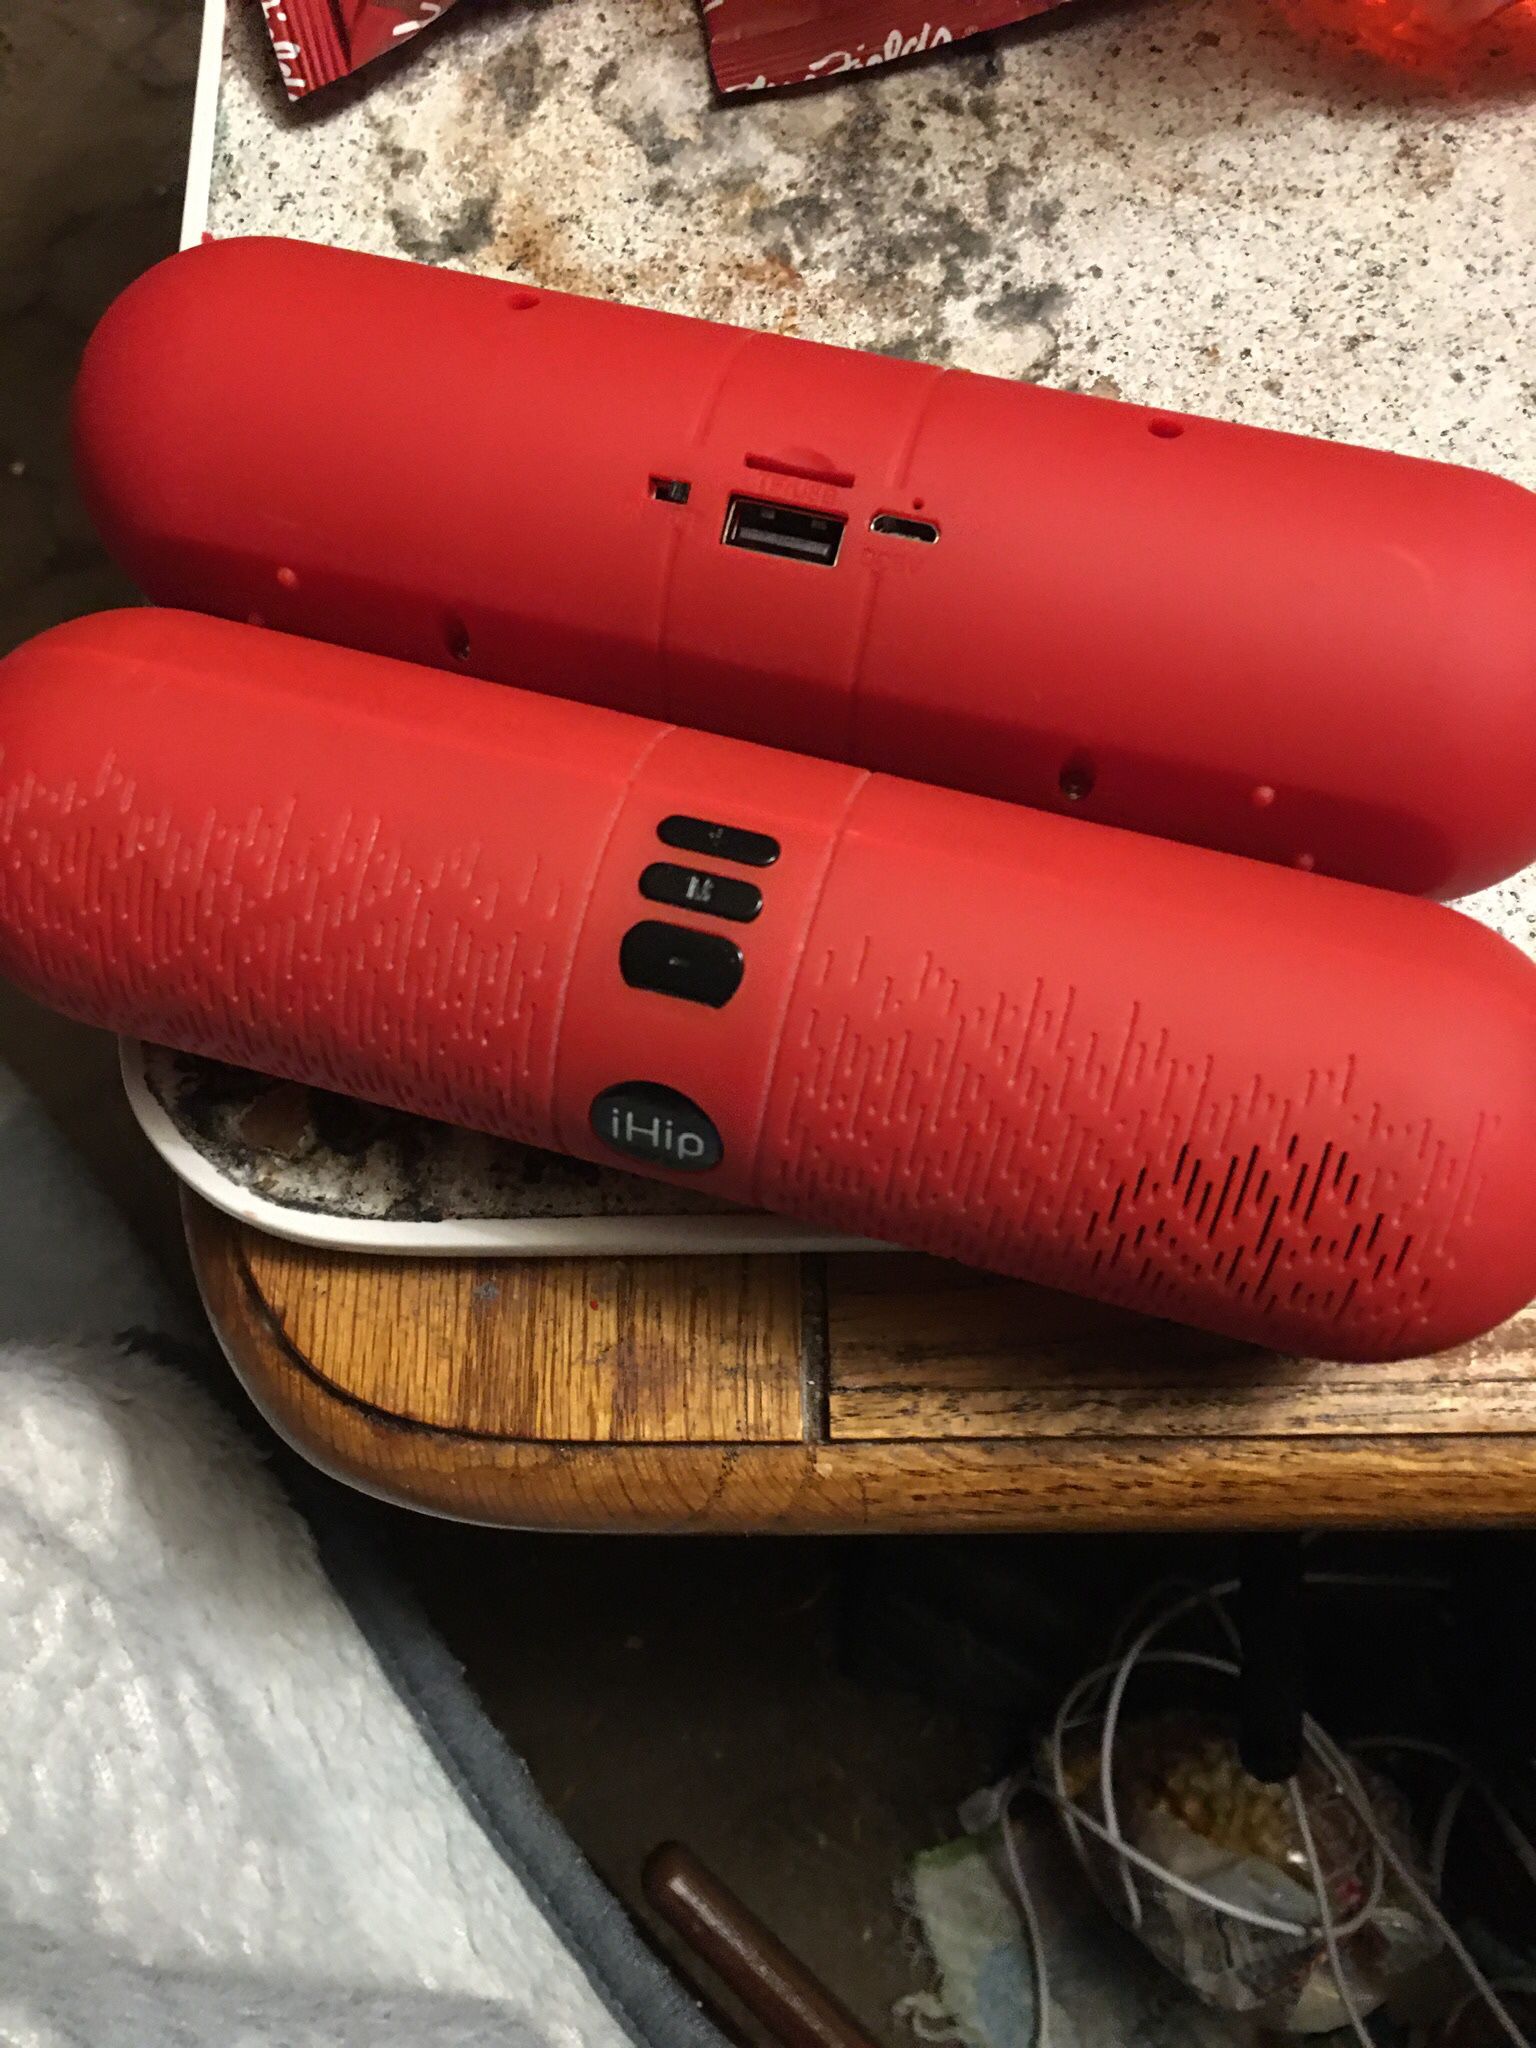 red pill shape bluetooth speaker package